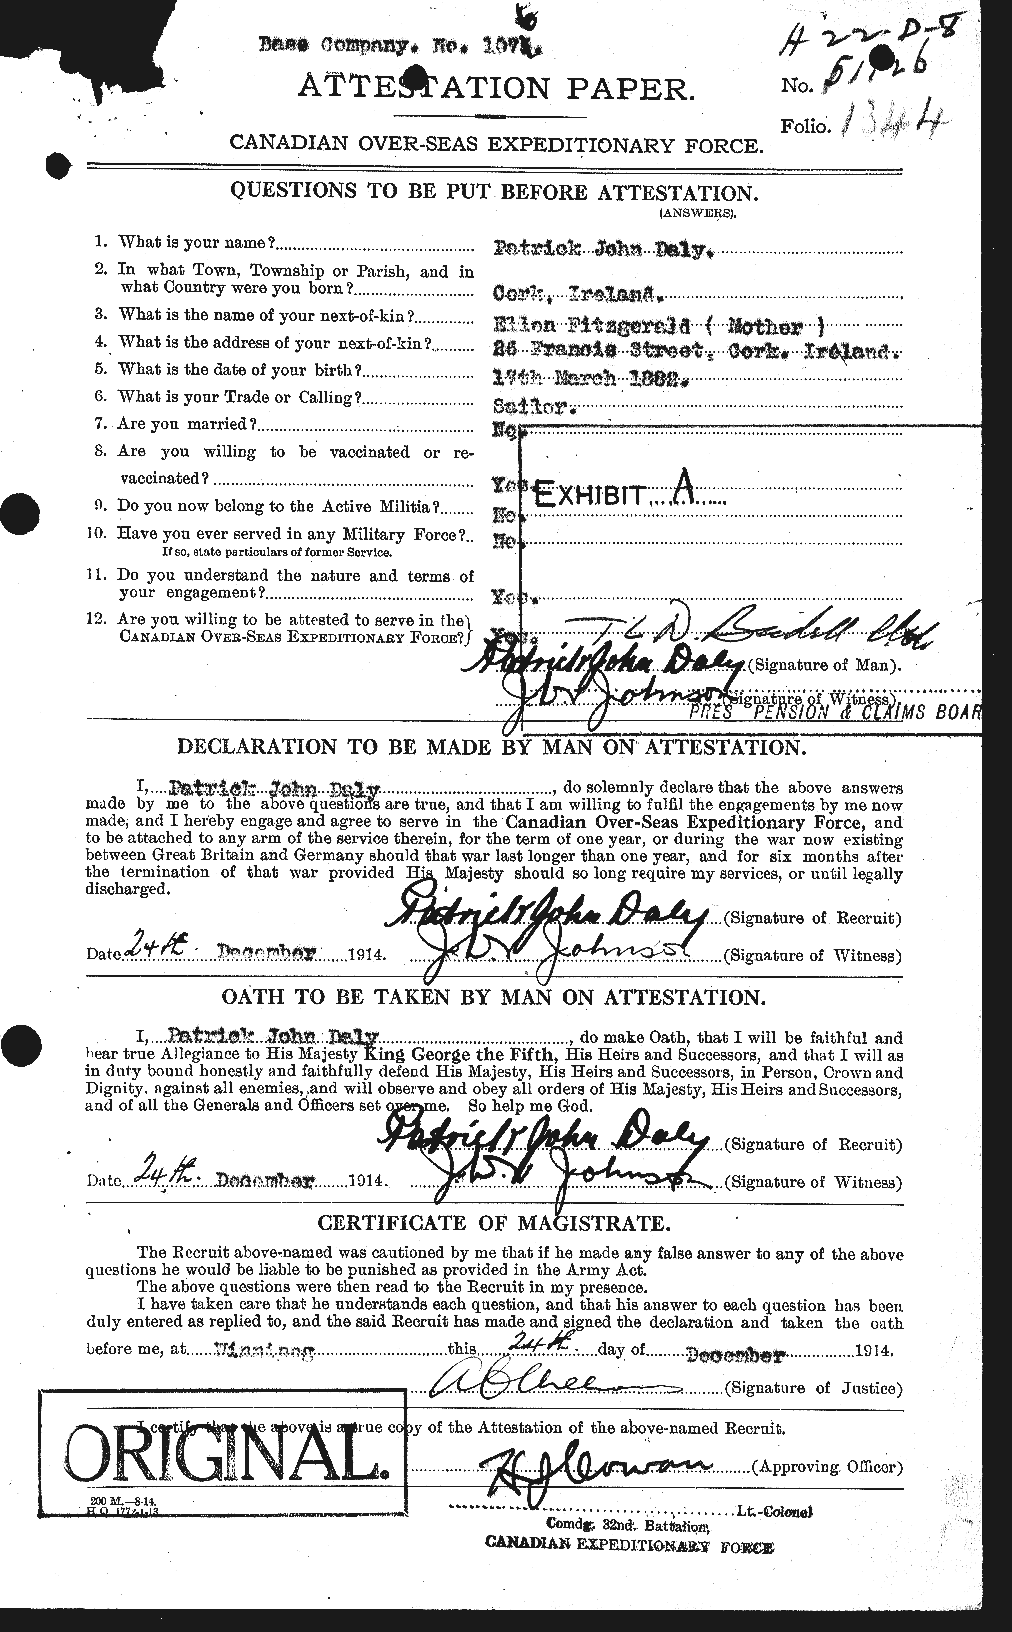 Personnel Records of the First World War - CEF 276392a